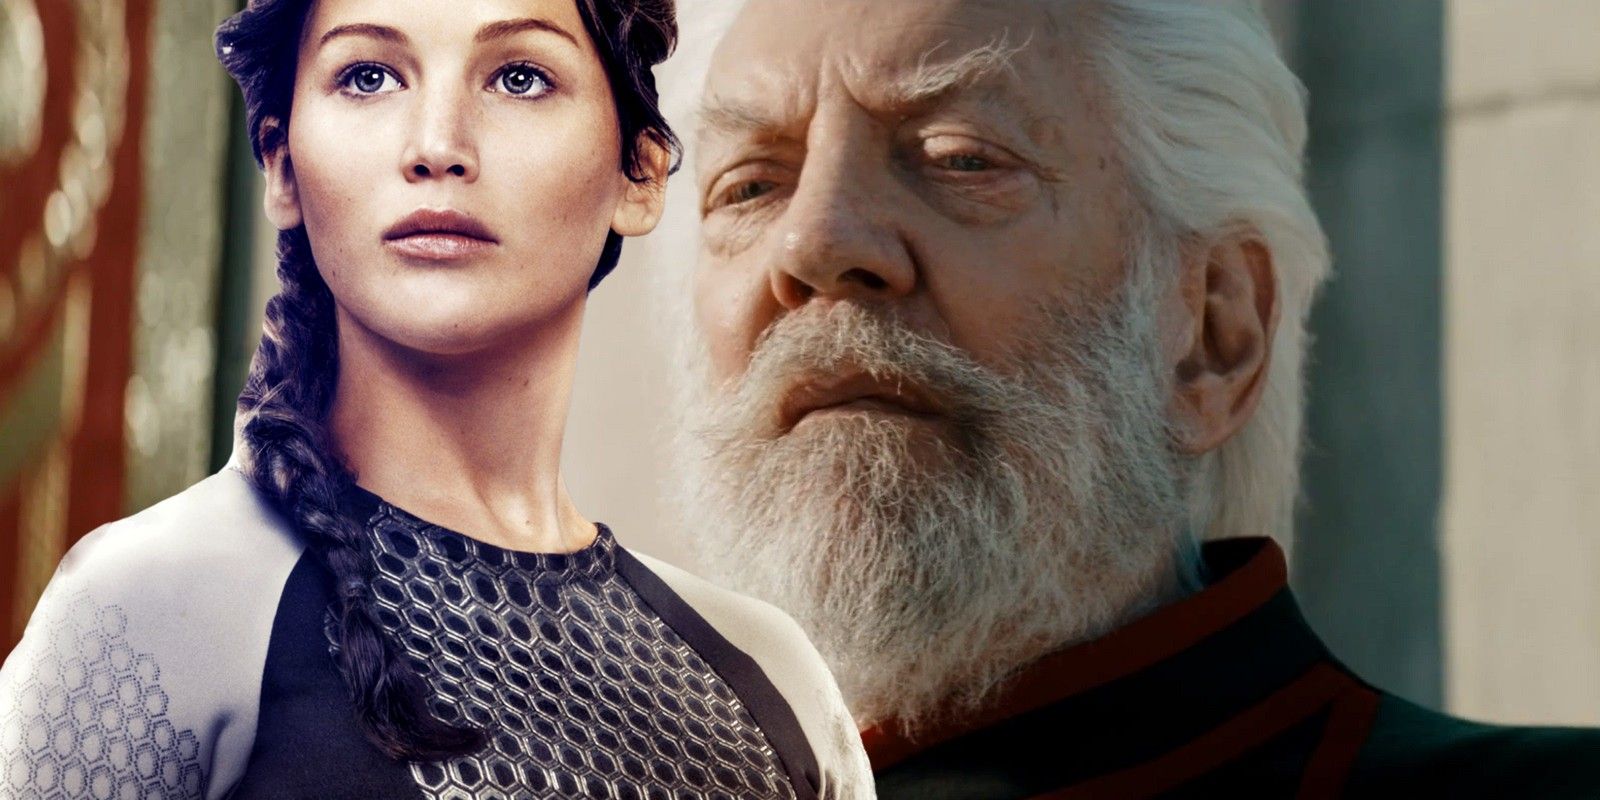 A blended image features Jennifer Lawrence as Katniss Everdeen and Donald Sutherland as Coriolanus Snow in The Hunger Games franchise